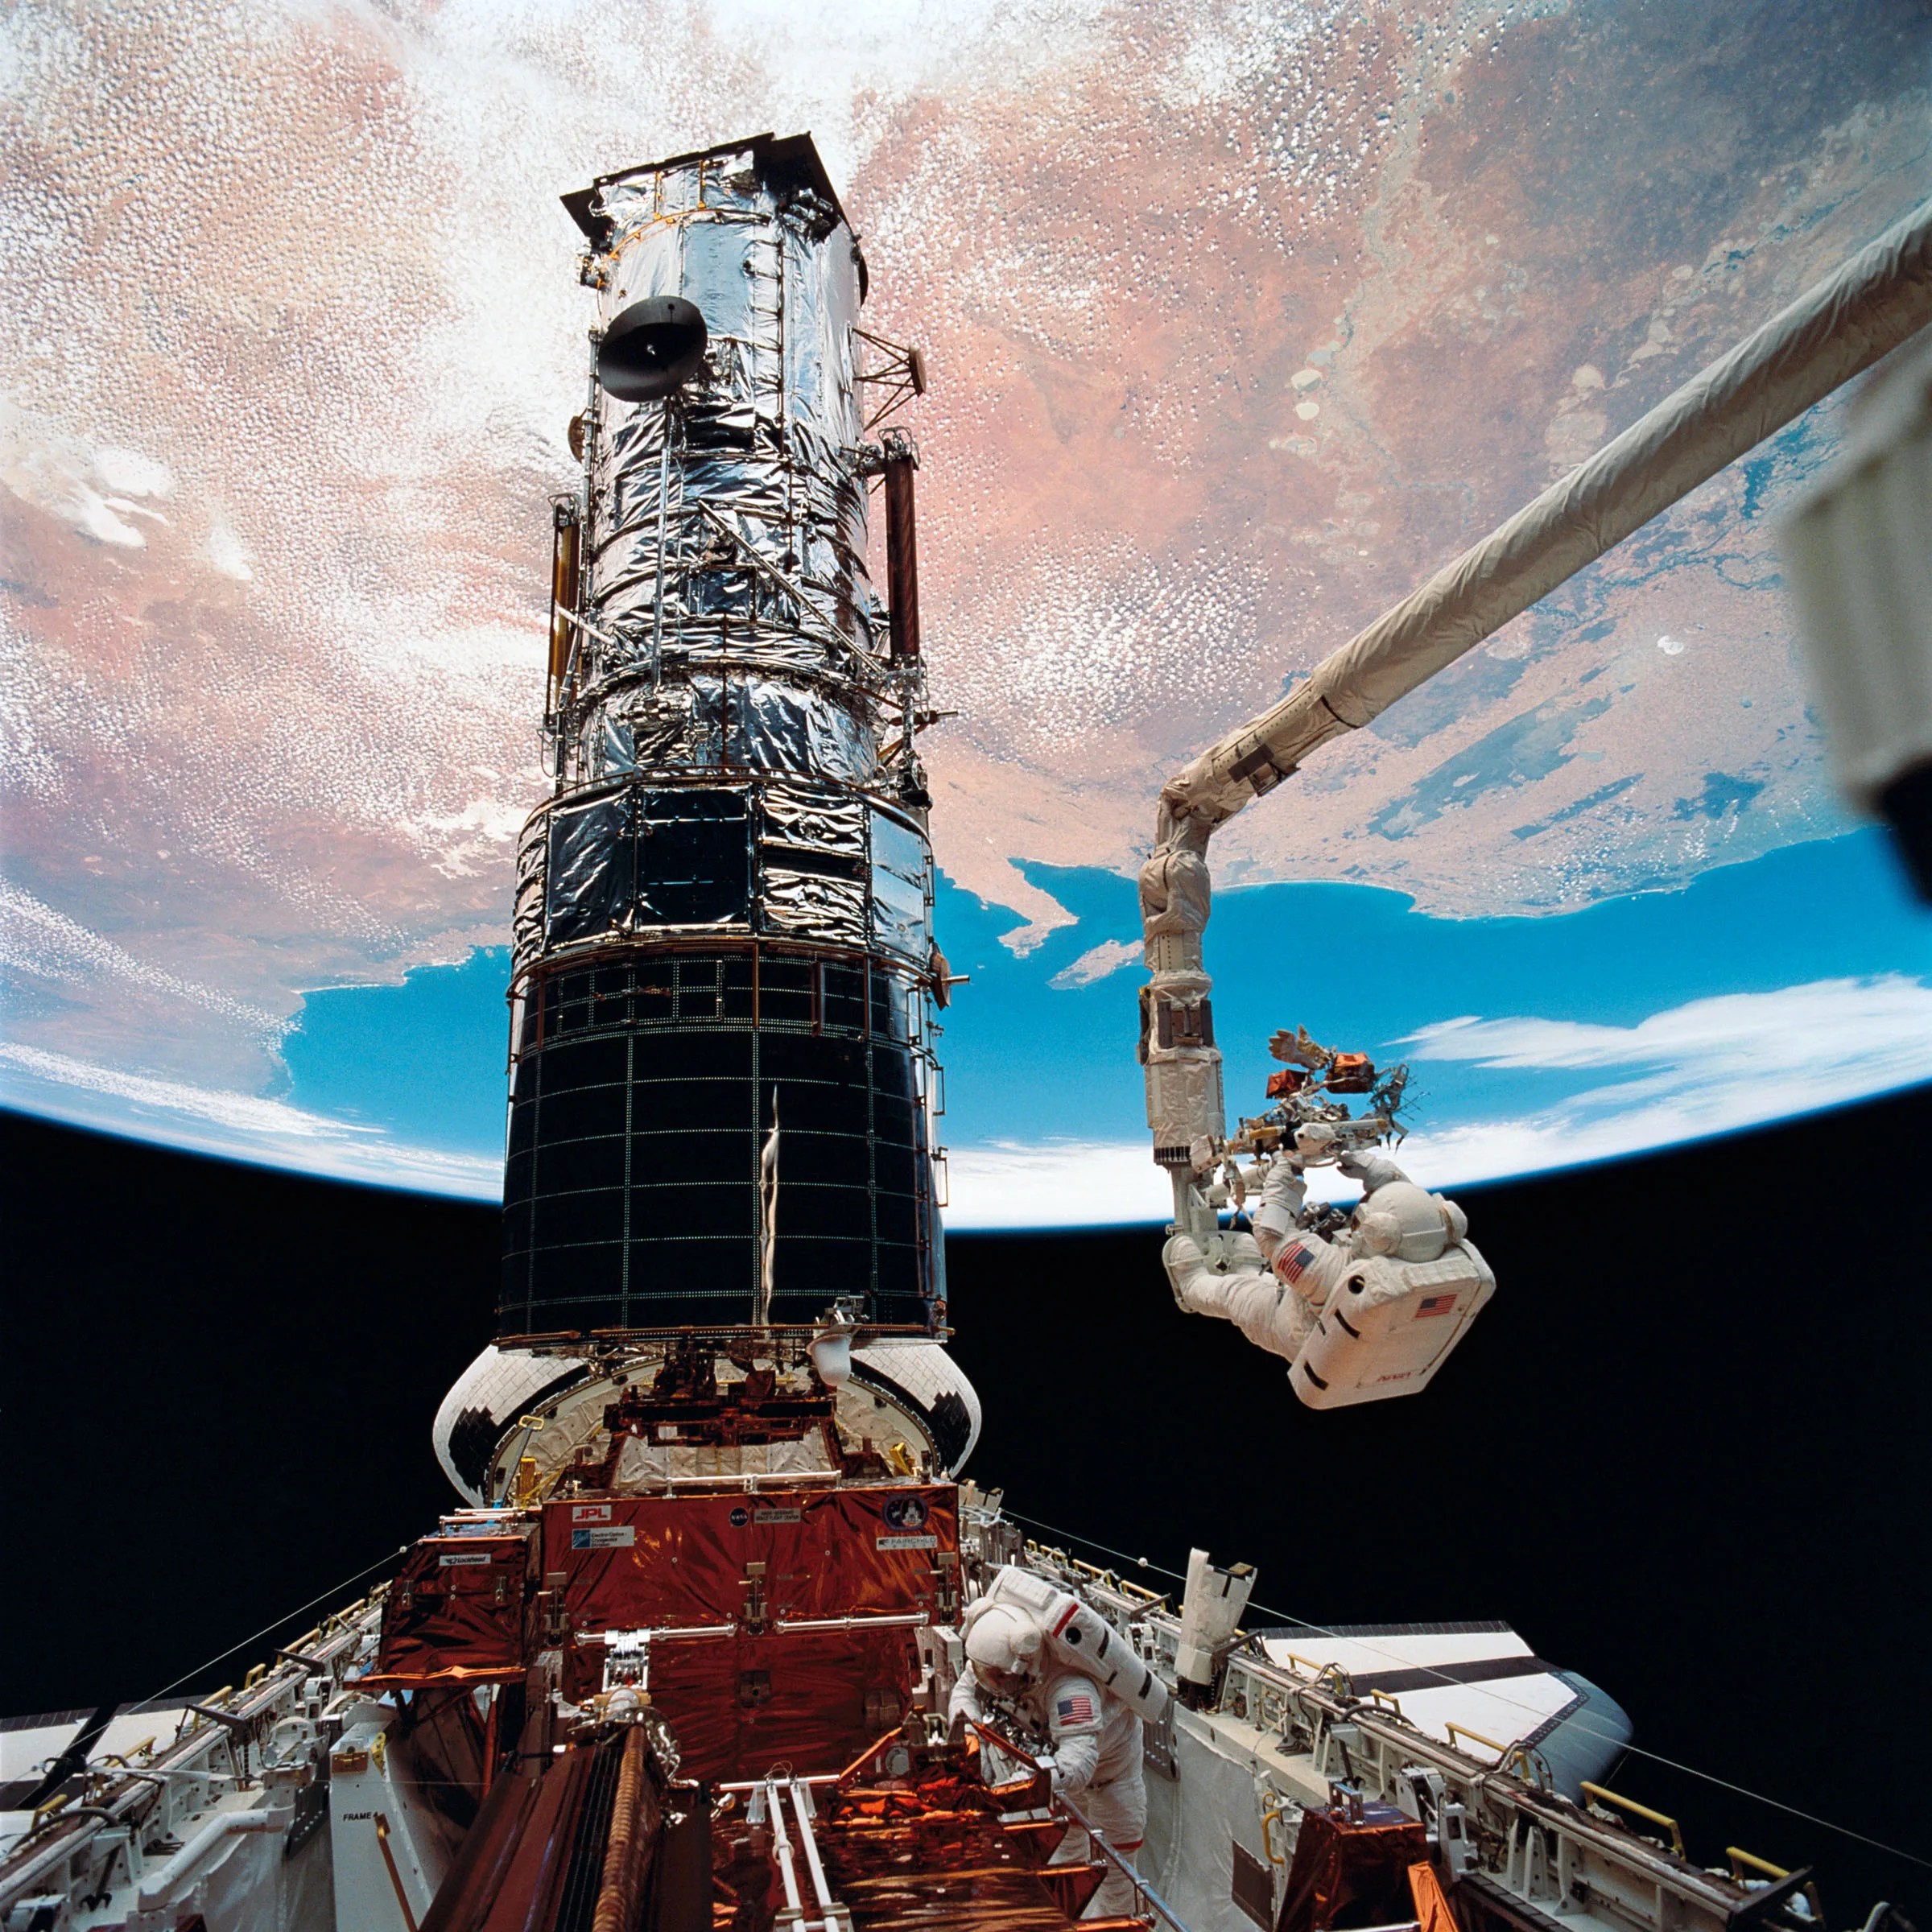 Two astronauts service Hubble, one standing in the space shuttle cargo bay and one attached to a robotic arm, with the Earth in the background in the upper half of the picture.